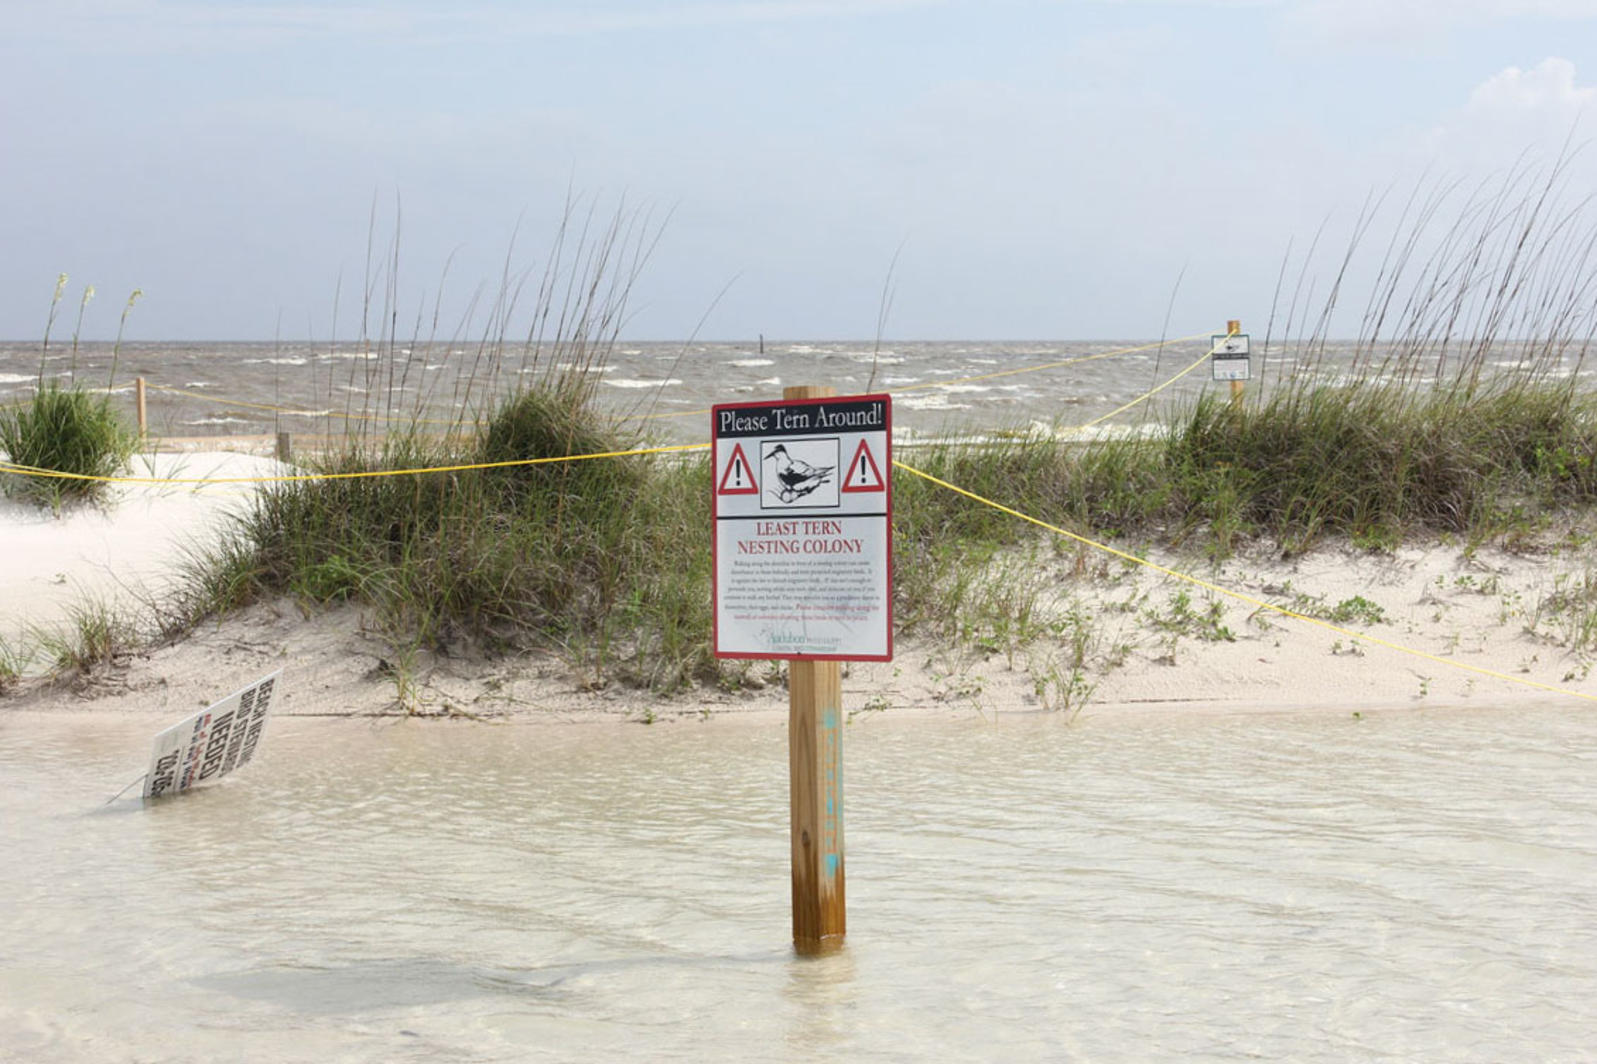 A Least Tern colony, marked by signs and twine, was submerged after Tropical Storm Cindy hit the Gulf Coast last week. Photo: Abby Darrah.